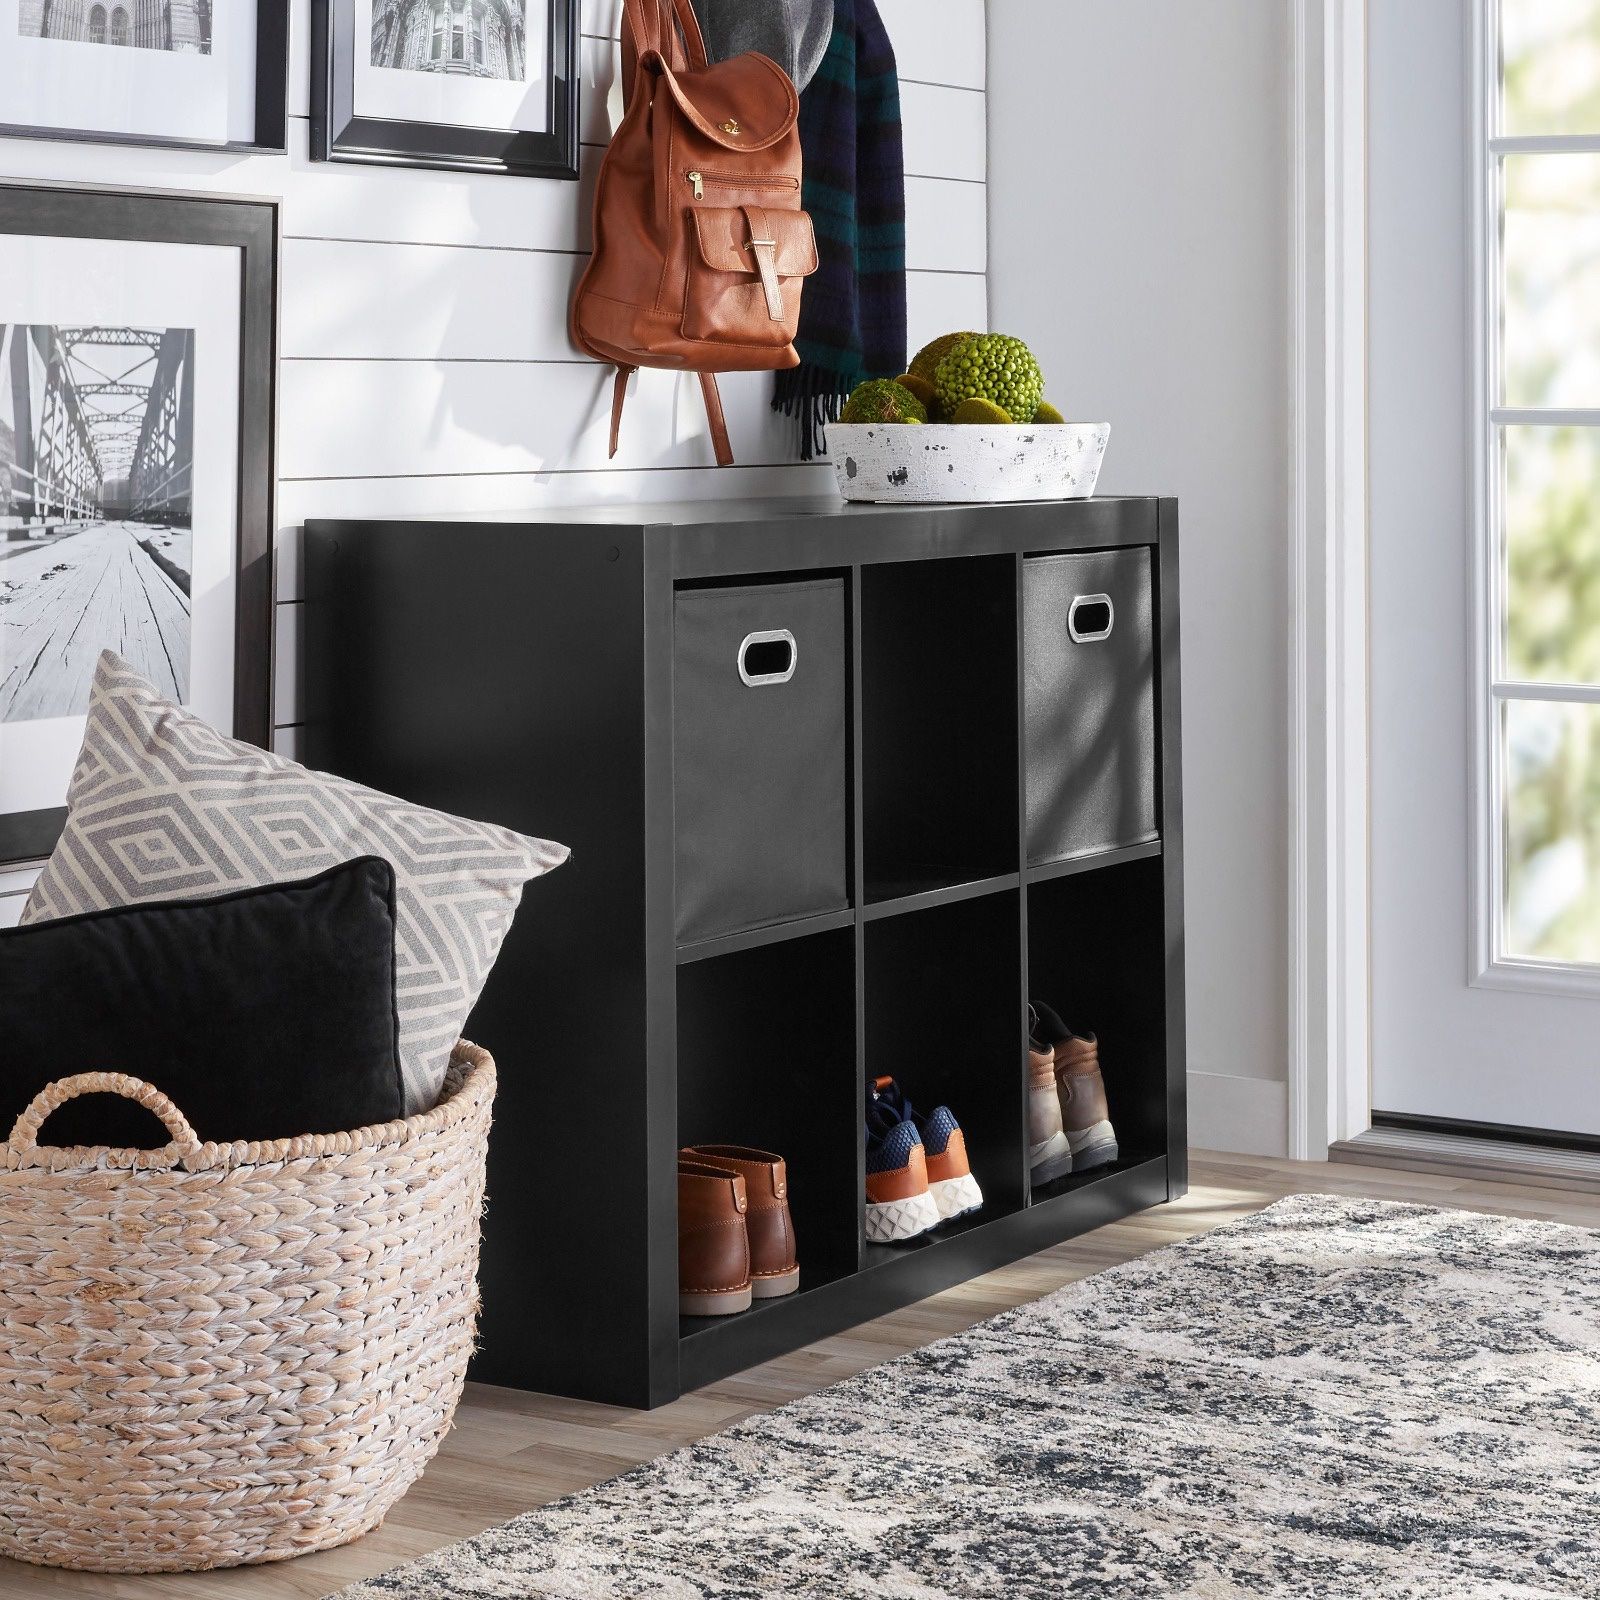 Better Homes & Gardens 6-Cube Storage Organizer, Black DESCRIPTION: Sleek, open back design for easy cord management Features 6 fixed 13" x 13" x 15"